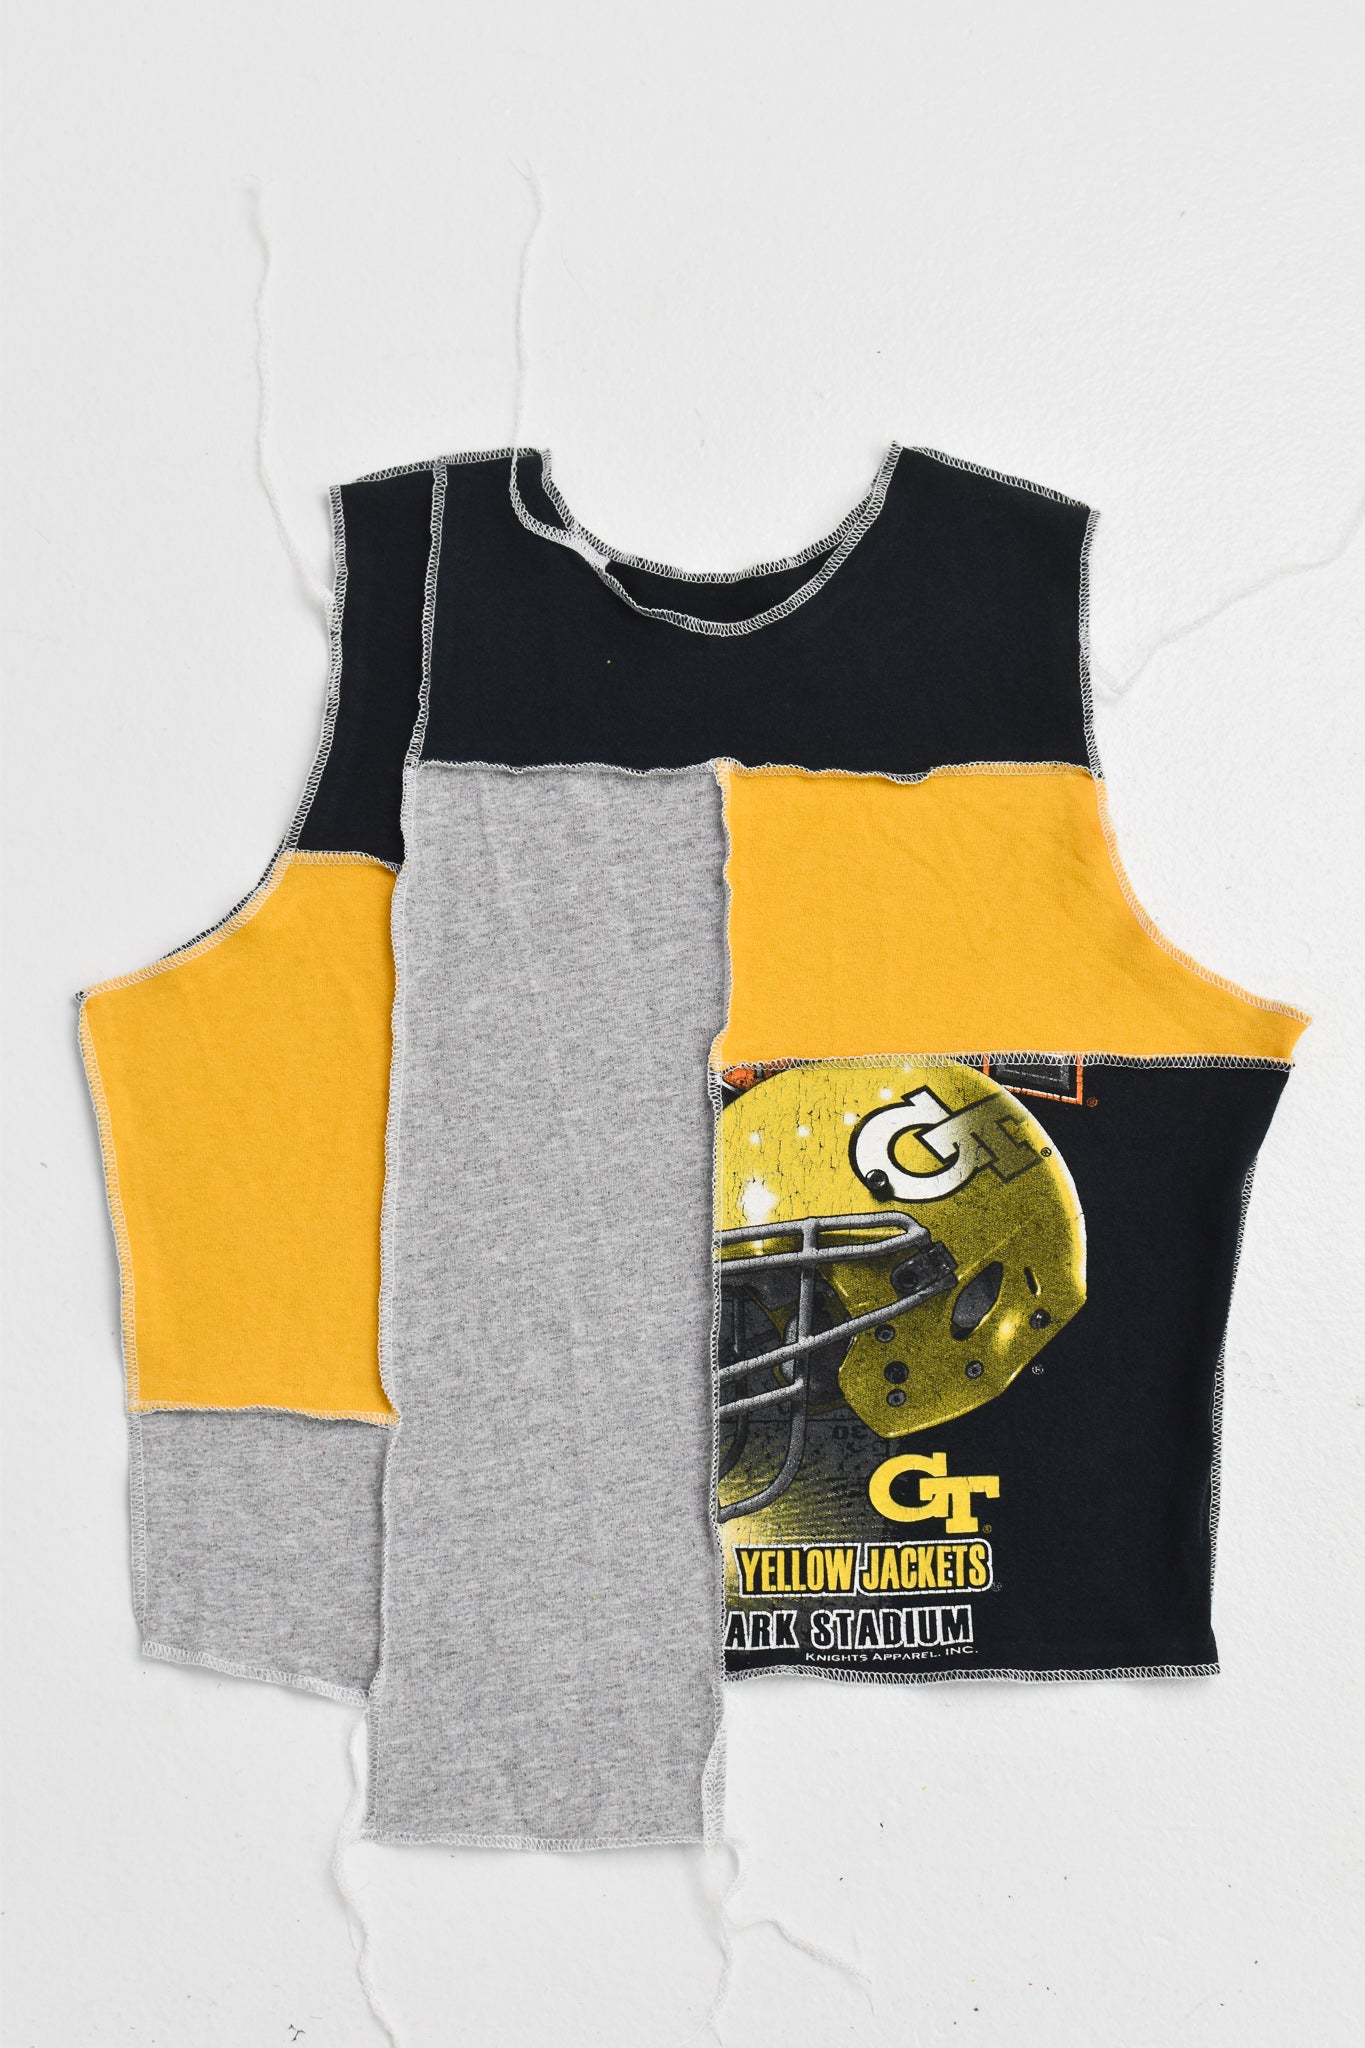 Upcycled Georgia Tech Scrappy Tank Top